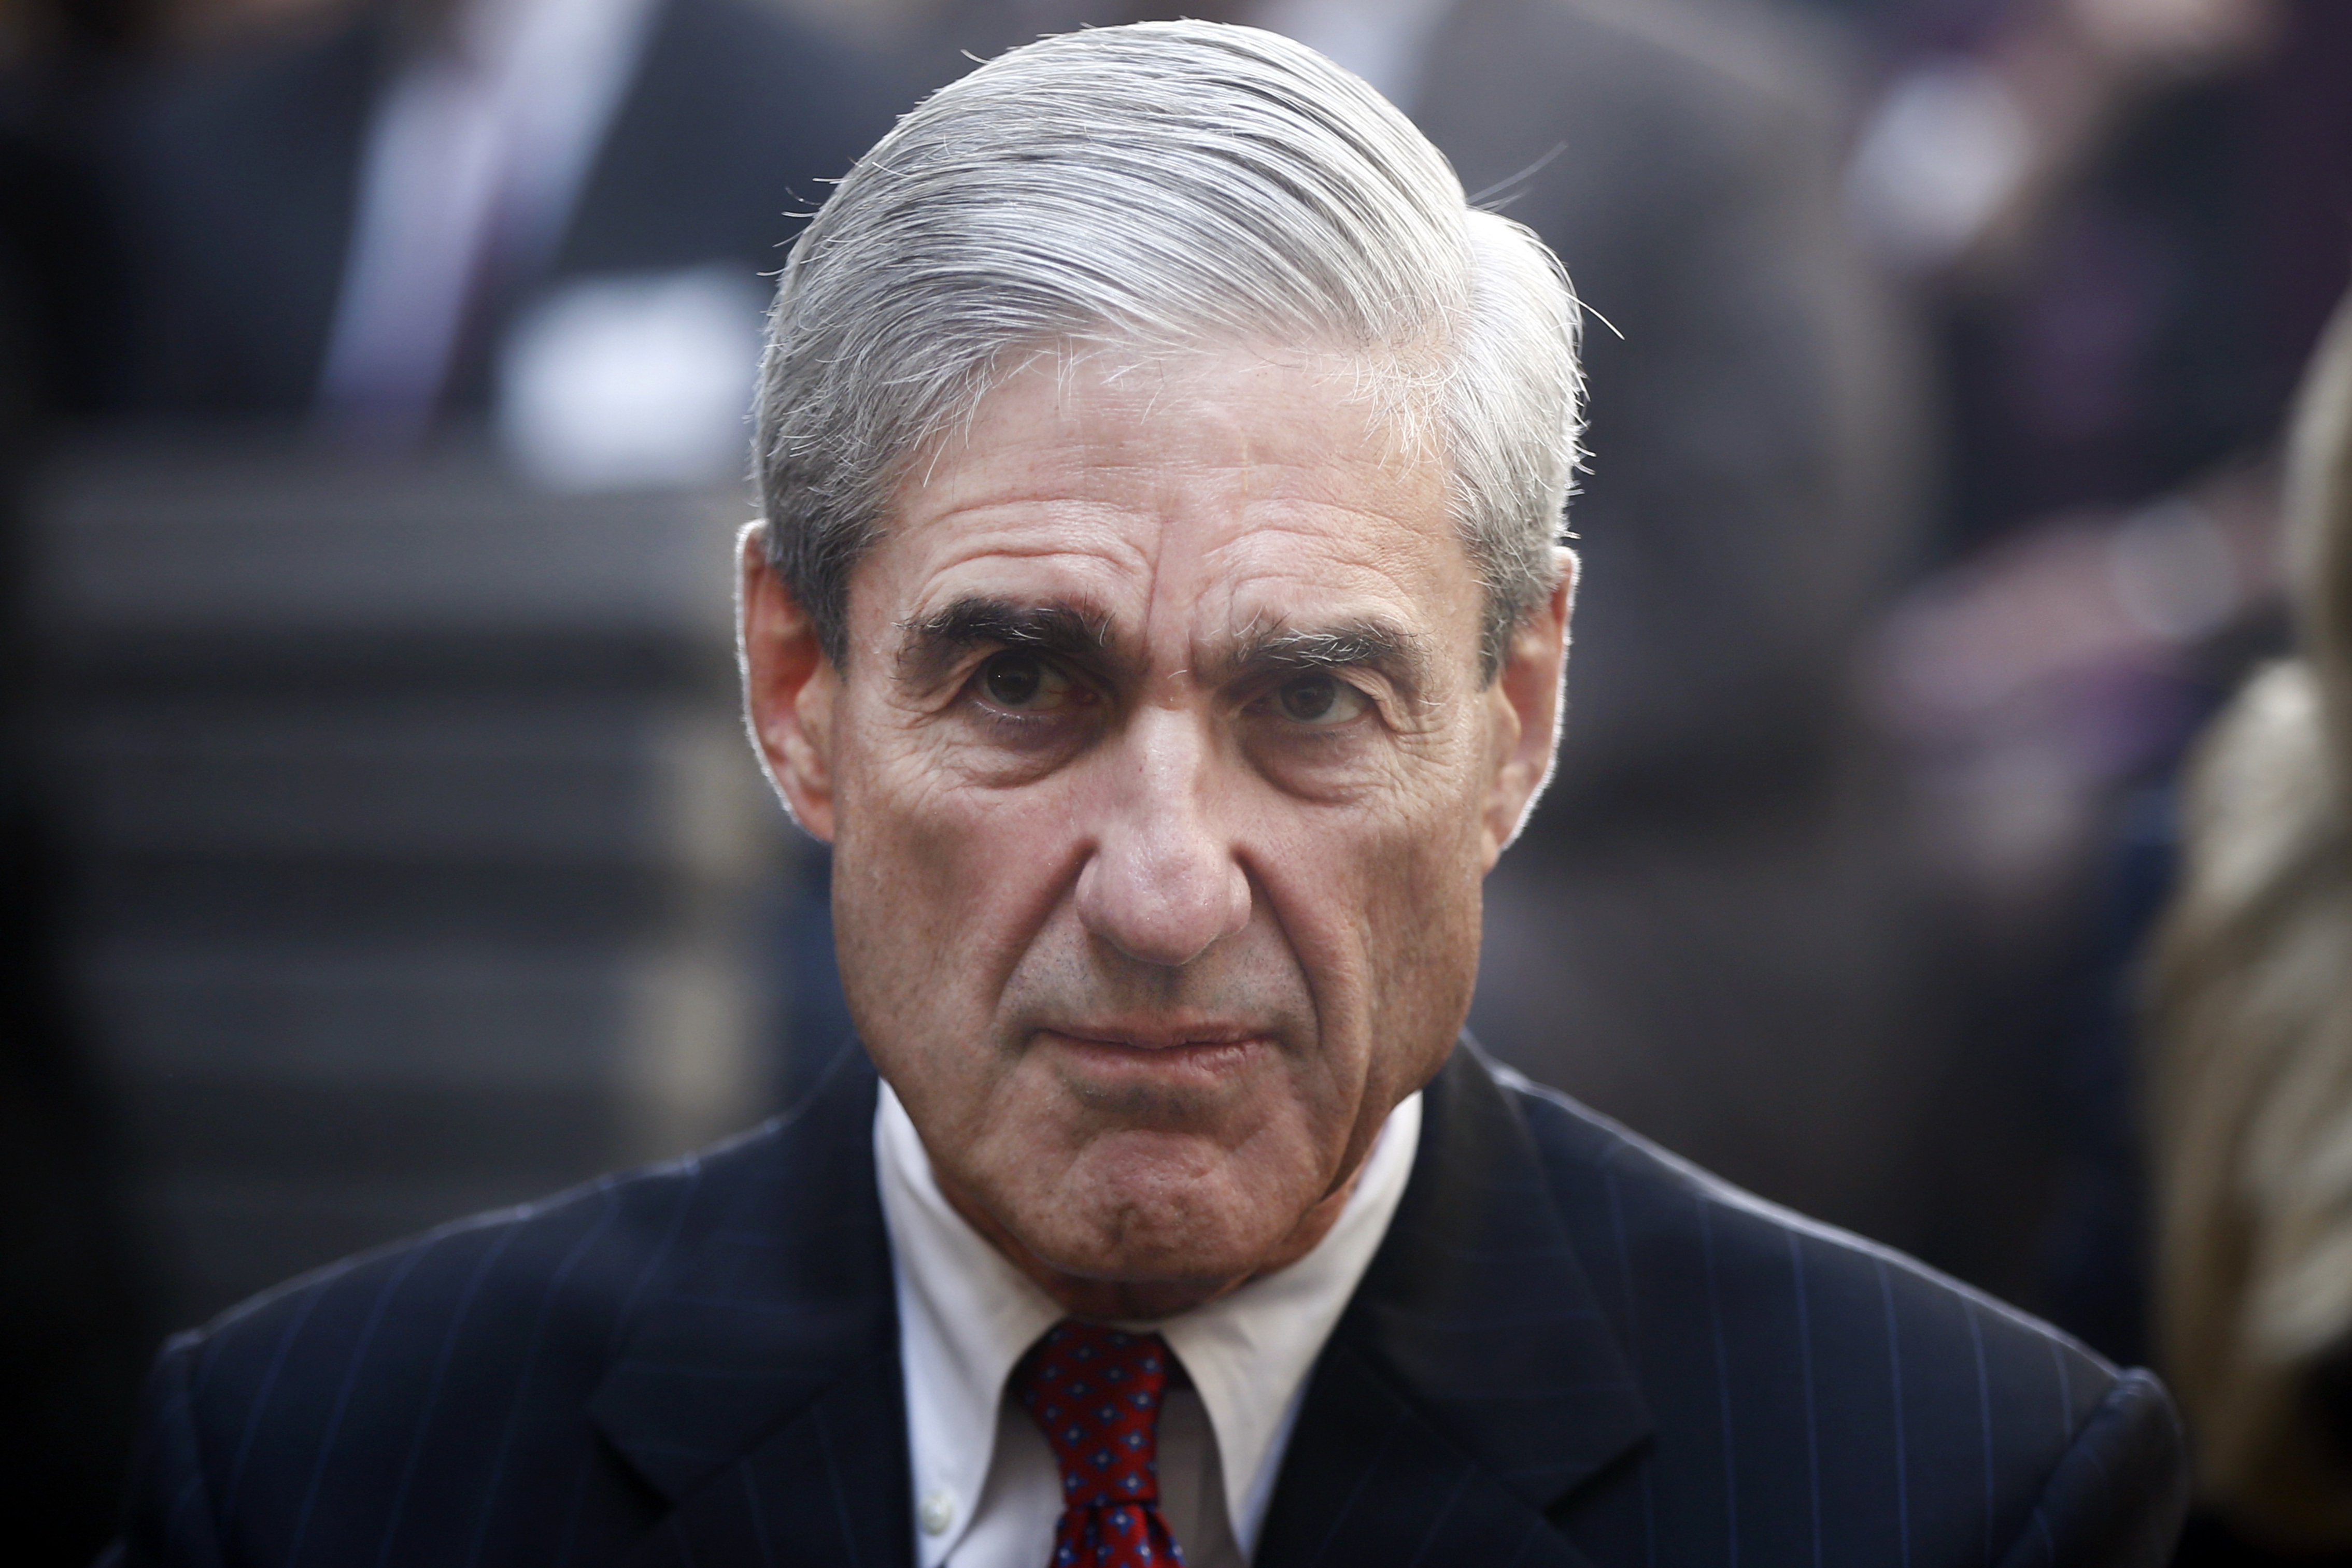 Mueller report: Trump tried repeatedly to choke Russia probe